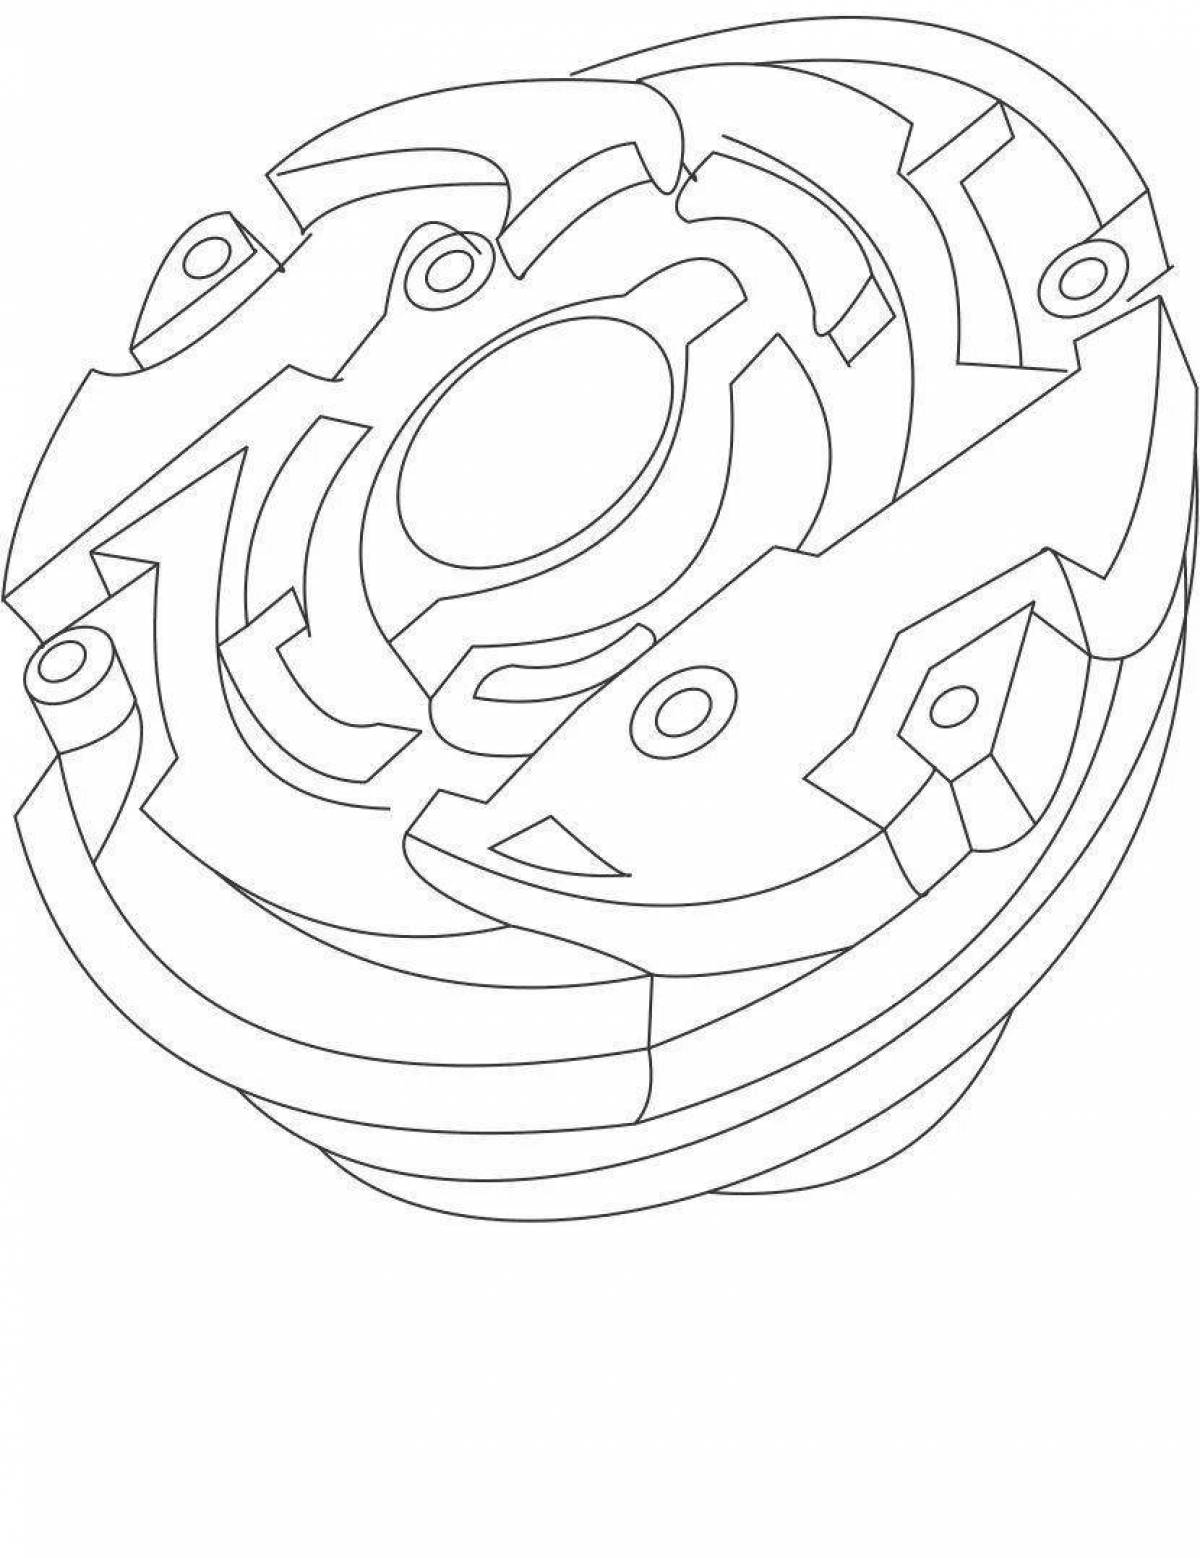 Beyblade awesome coloring book